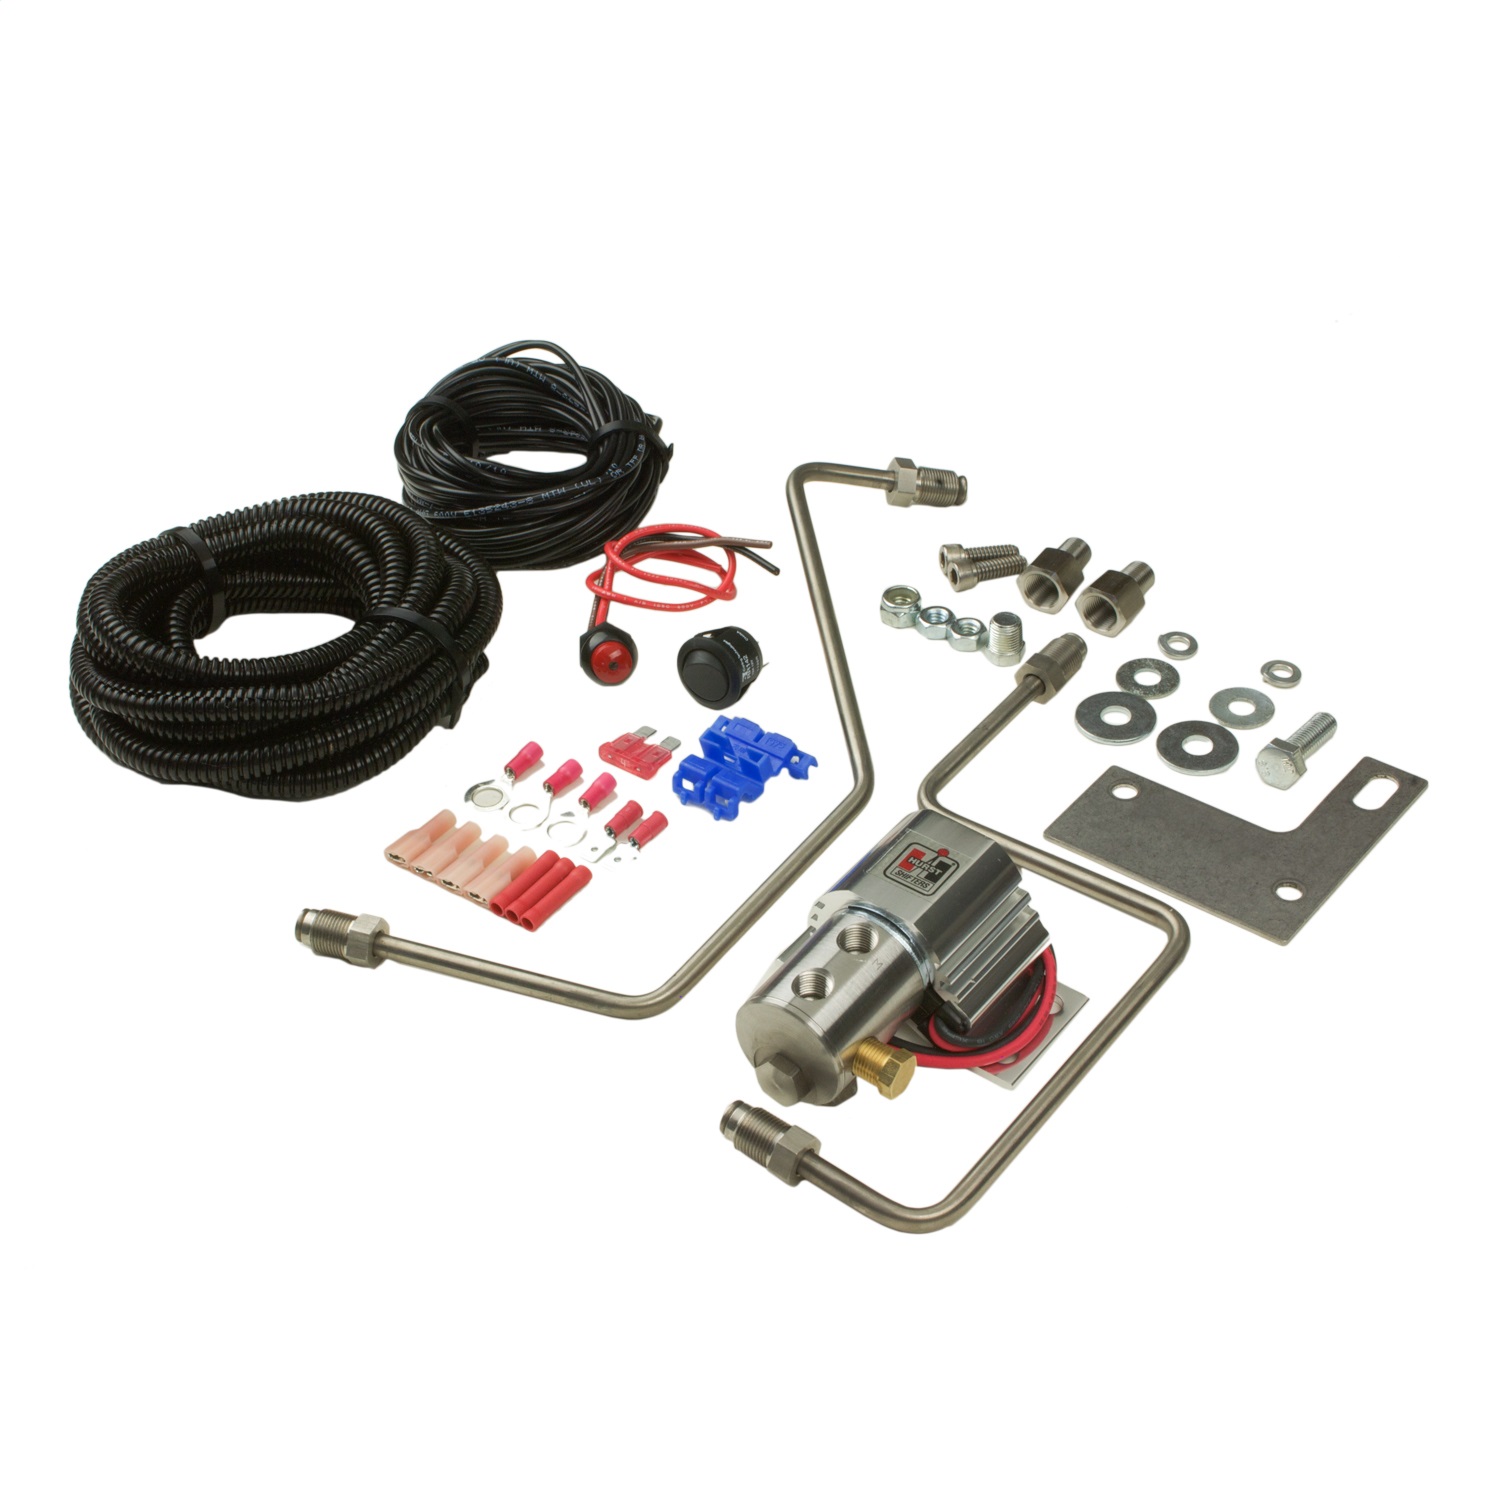 Hurst Hurst 5671517 Roll/Control Launch Control Kit Fits 08-10 Challenger